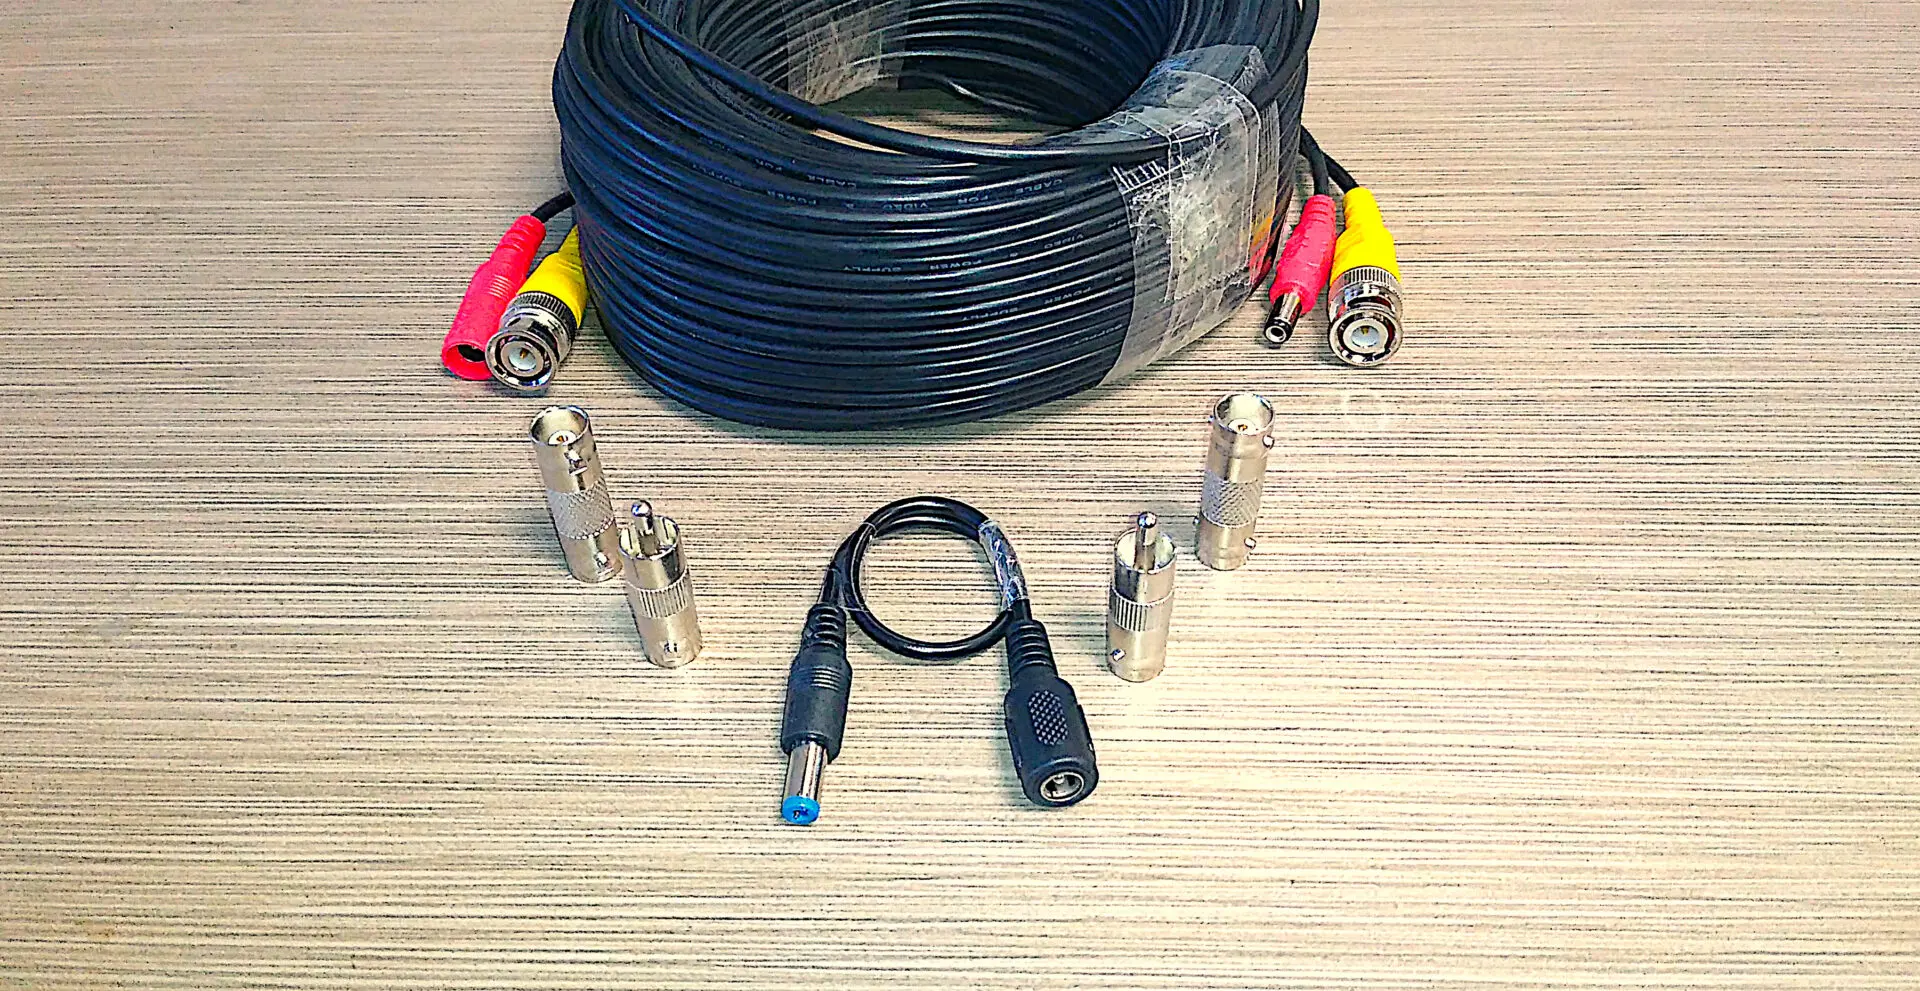 A collection of Video Security Camera Wire with Connectors for CCTV Camera DVR Surveillance System, including a coiled black cable and various types of metal plugs, arranged on a textured surface.